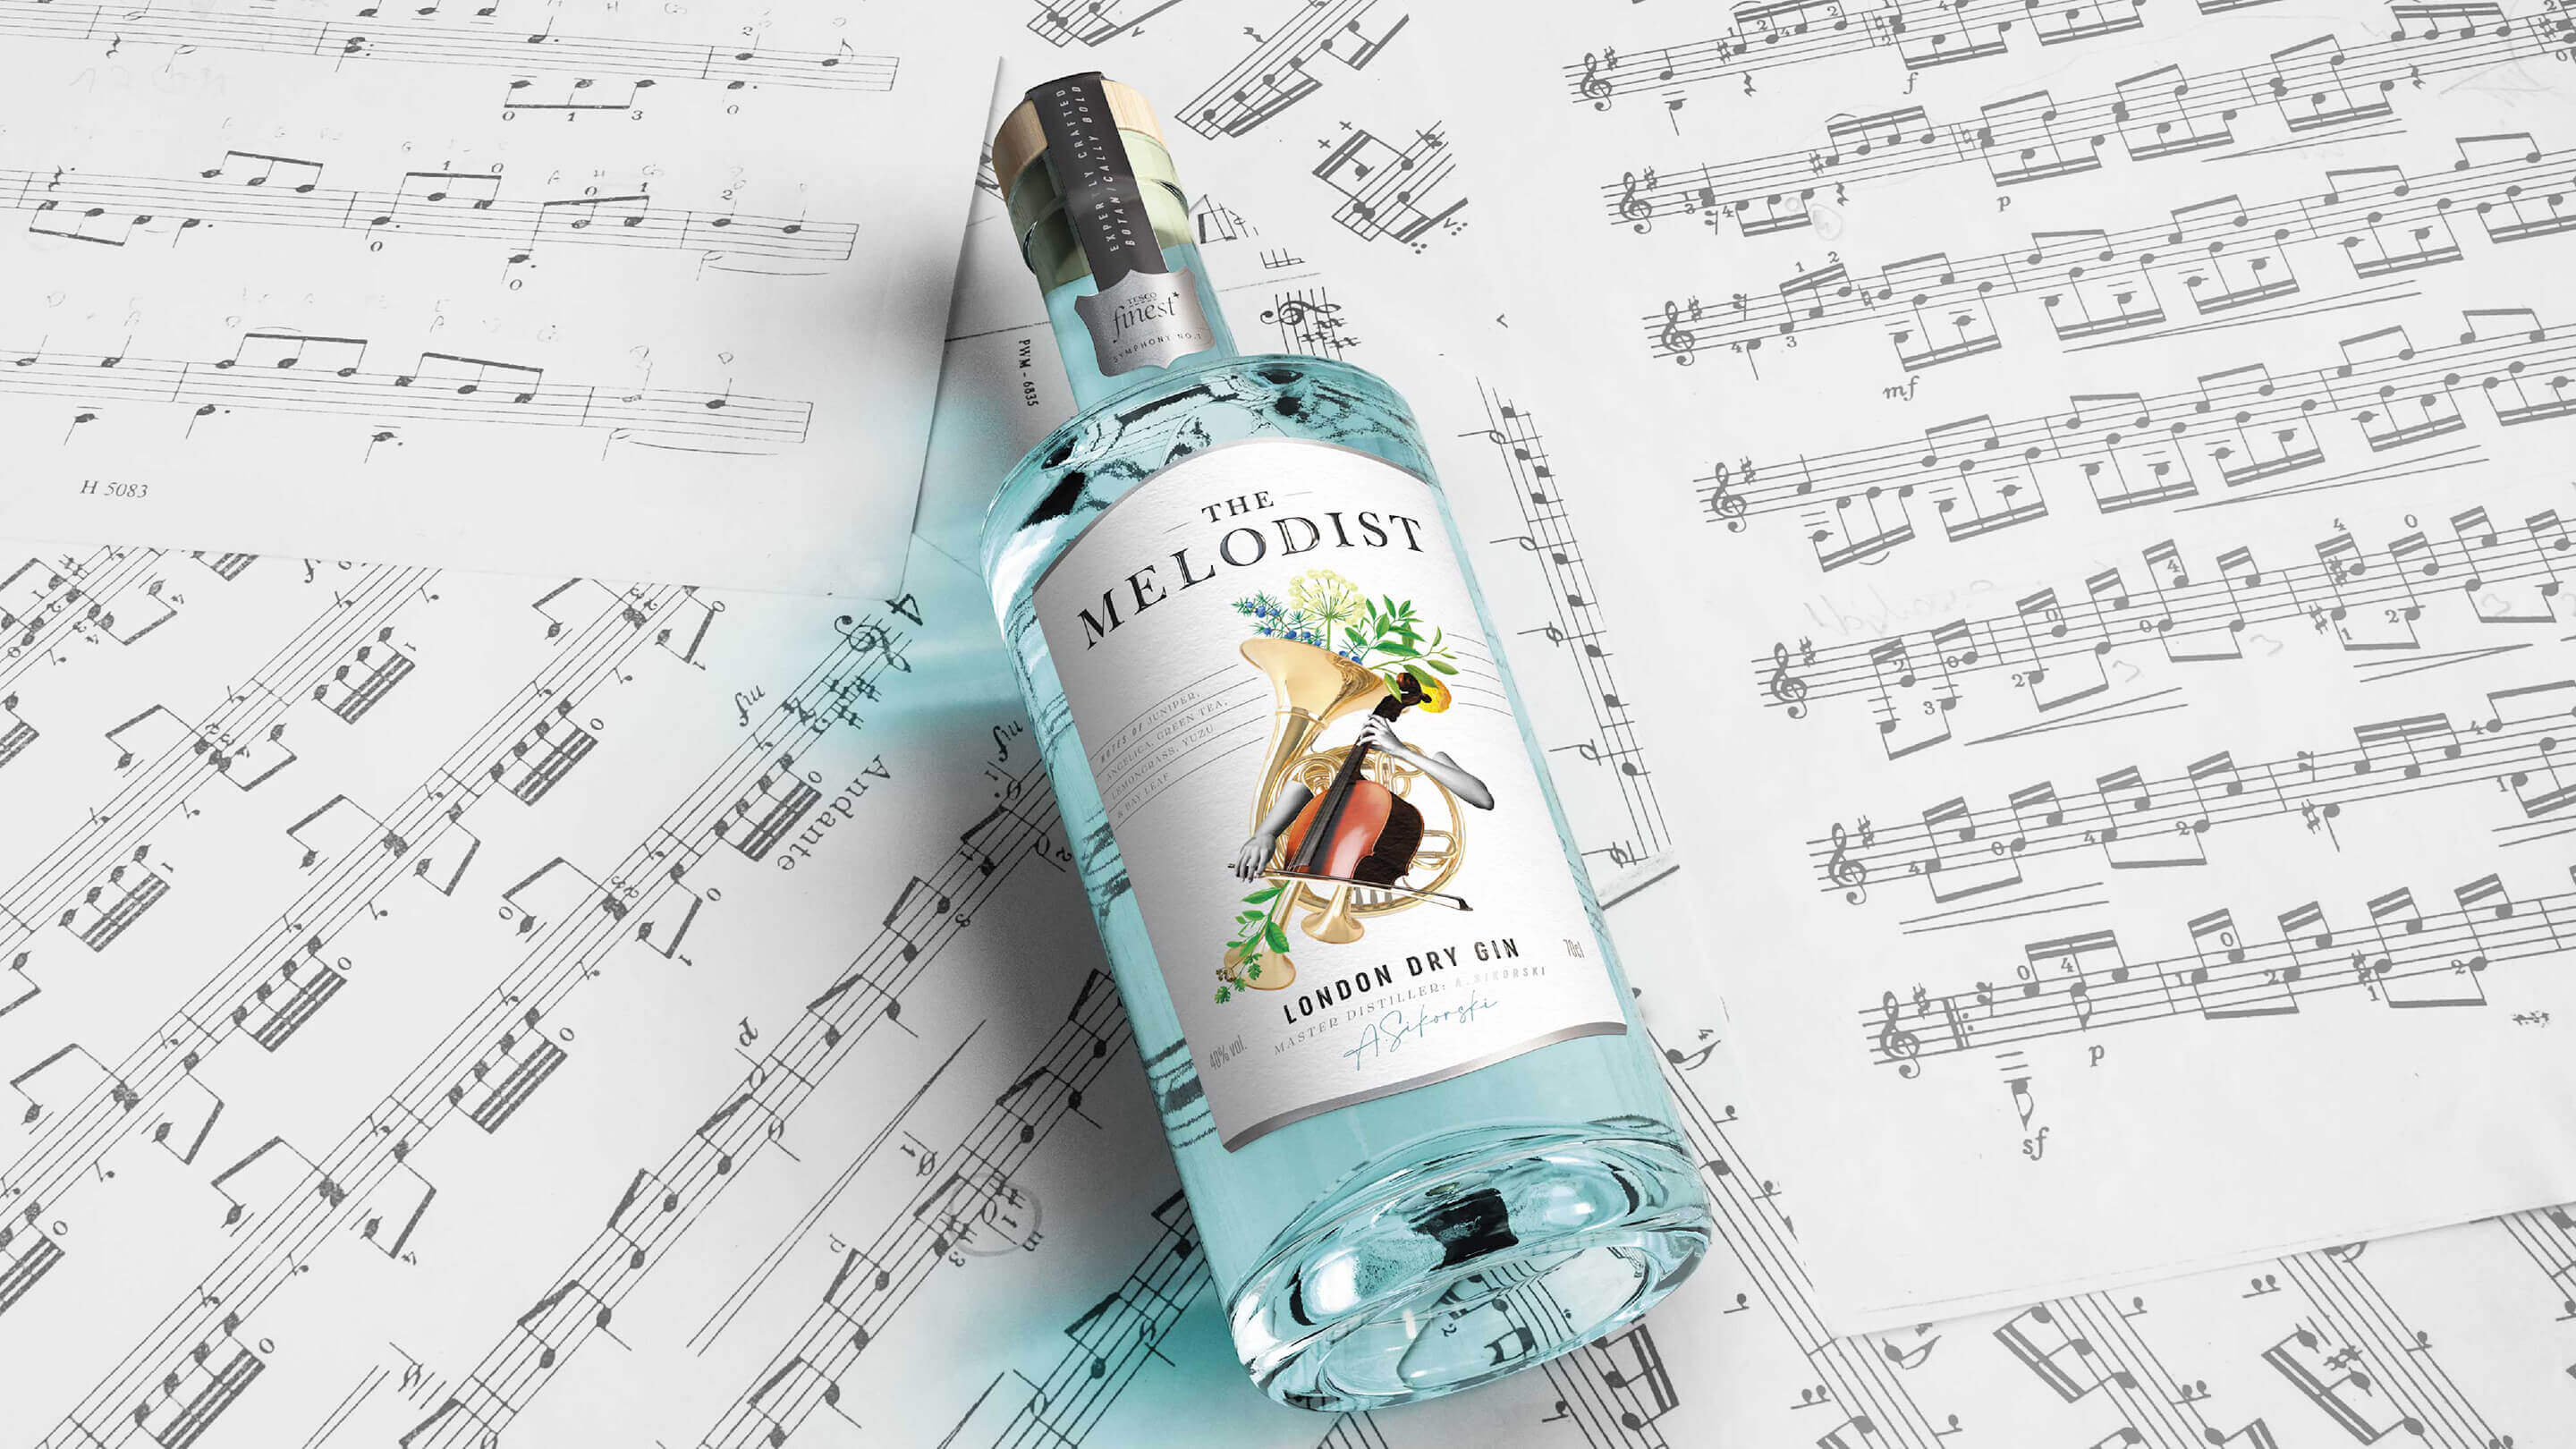 The Molodist - A bottle of London dry gin on a stack of music sheets